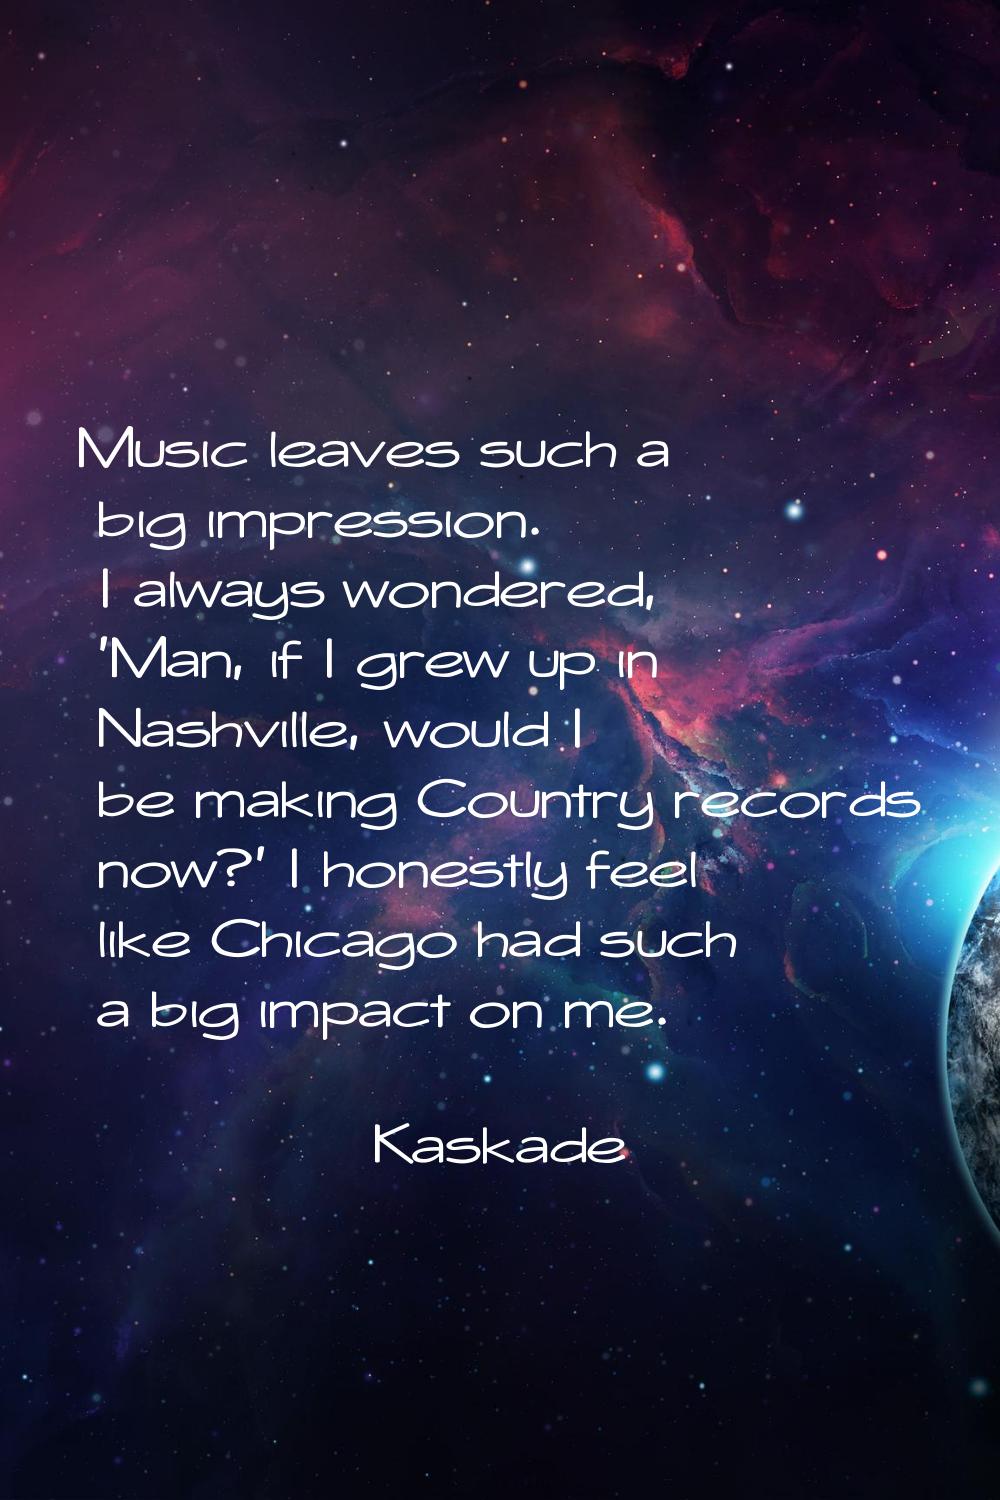 Music leaves such a big impression. I always wondered, 'Man, if I grew up in Nashville, would I be 